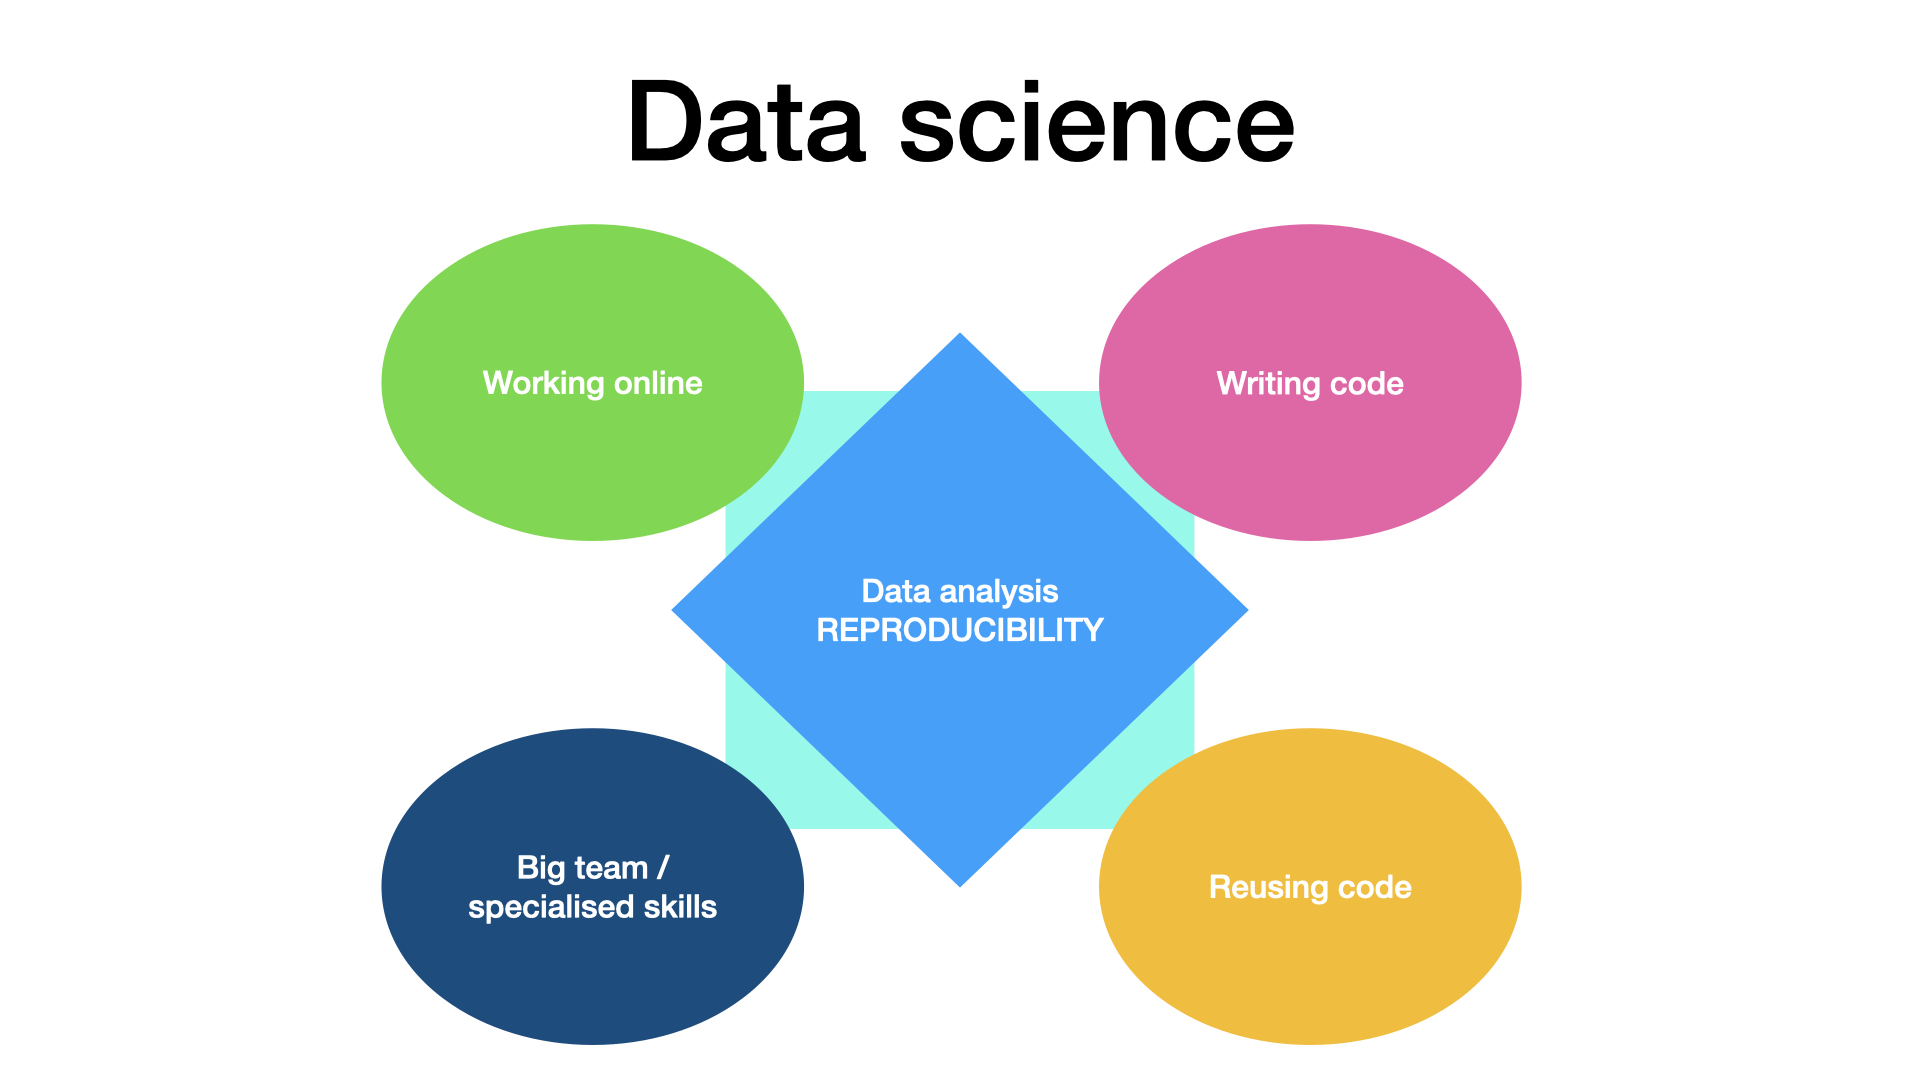 Specicity of data science project. Five blocks (working online, large teams whose members have with specialised skills, writing code and re-using code) are placed around a central block where reproducible analysis is written. Data specifics by Julien Colomb CC-BY 4.0 